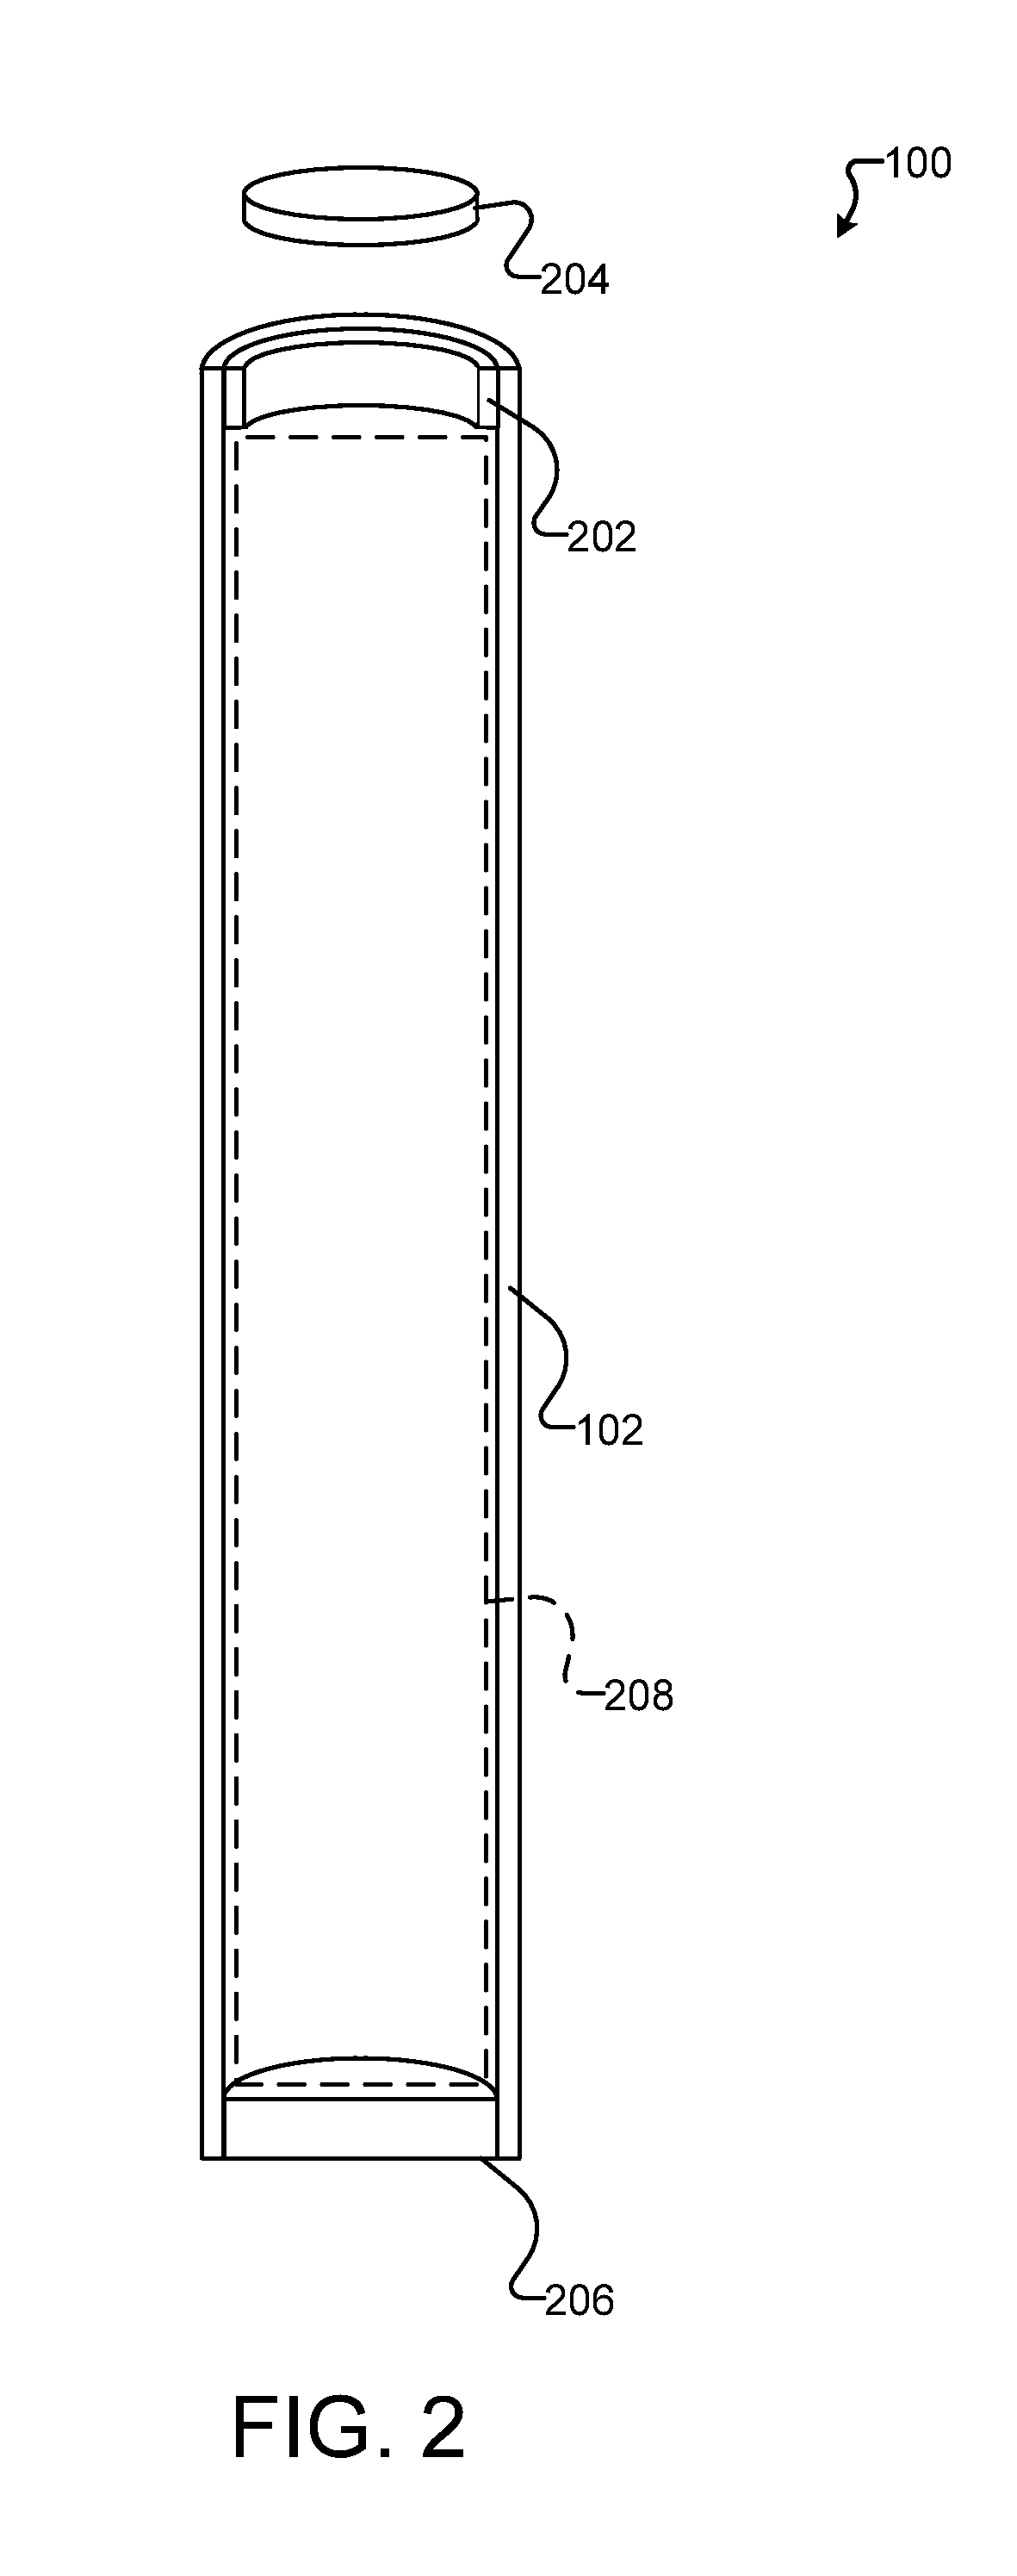 Apparatus, system, and method for a core-stabilized exercise bench